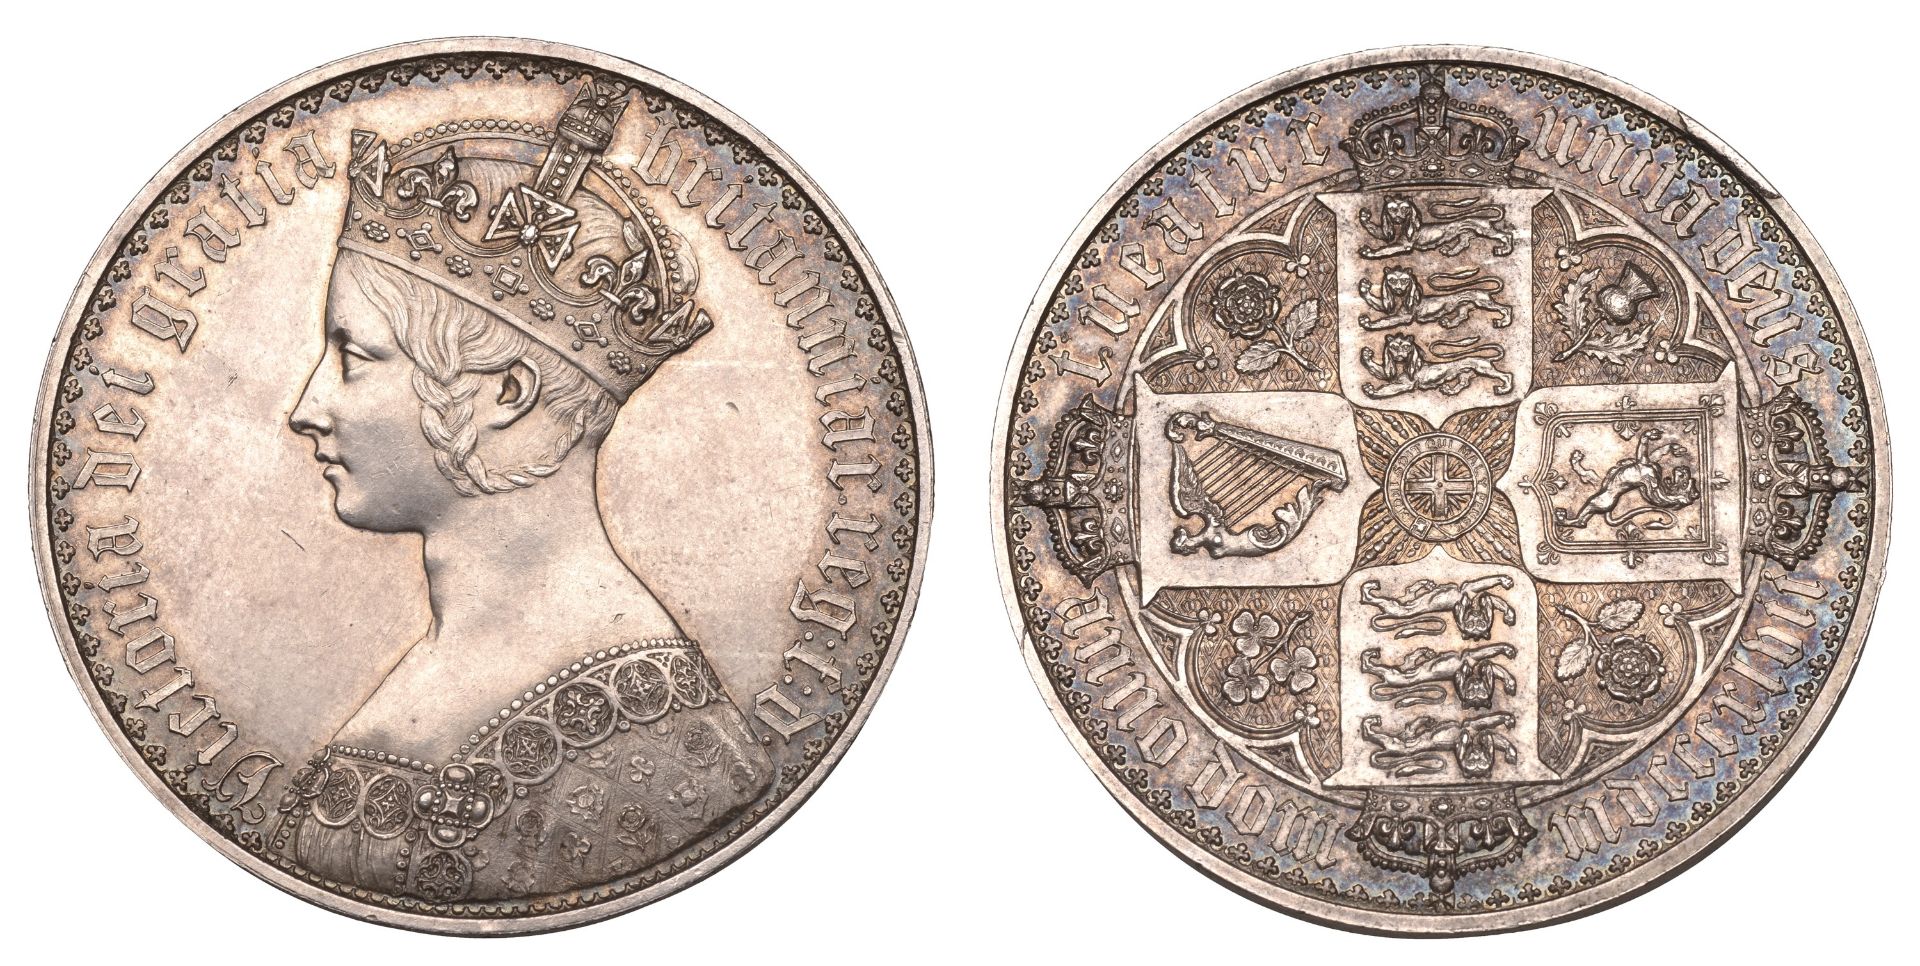 Victoria (1837-1901), Proof 'Gothic' Crown, 1847, m of dom over inverted m, edge plain, 28.1...